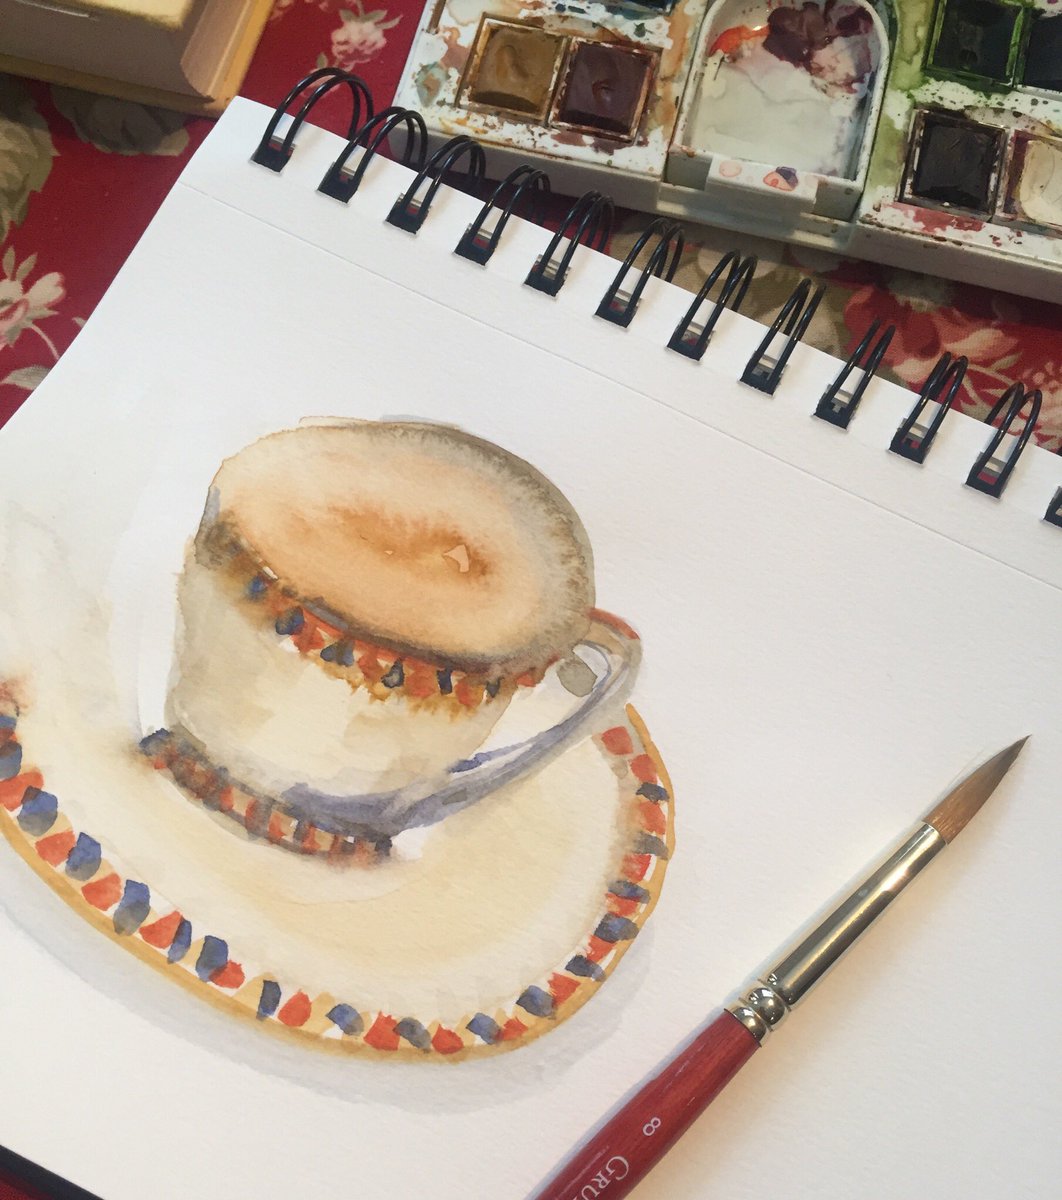 #teacuptuesday
Stormy cup of milky chai on this stormy winter day. A new brush certainly stirs up my style a la @lizsteelart 
What’s in your cup, #teahour ?
#practiceisart #watercolourpaint #teacosymaker